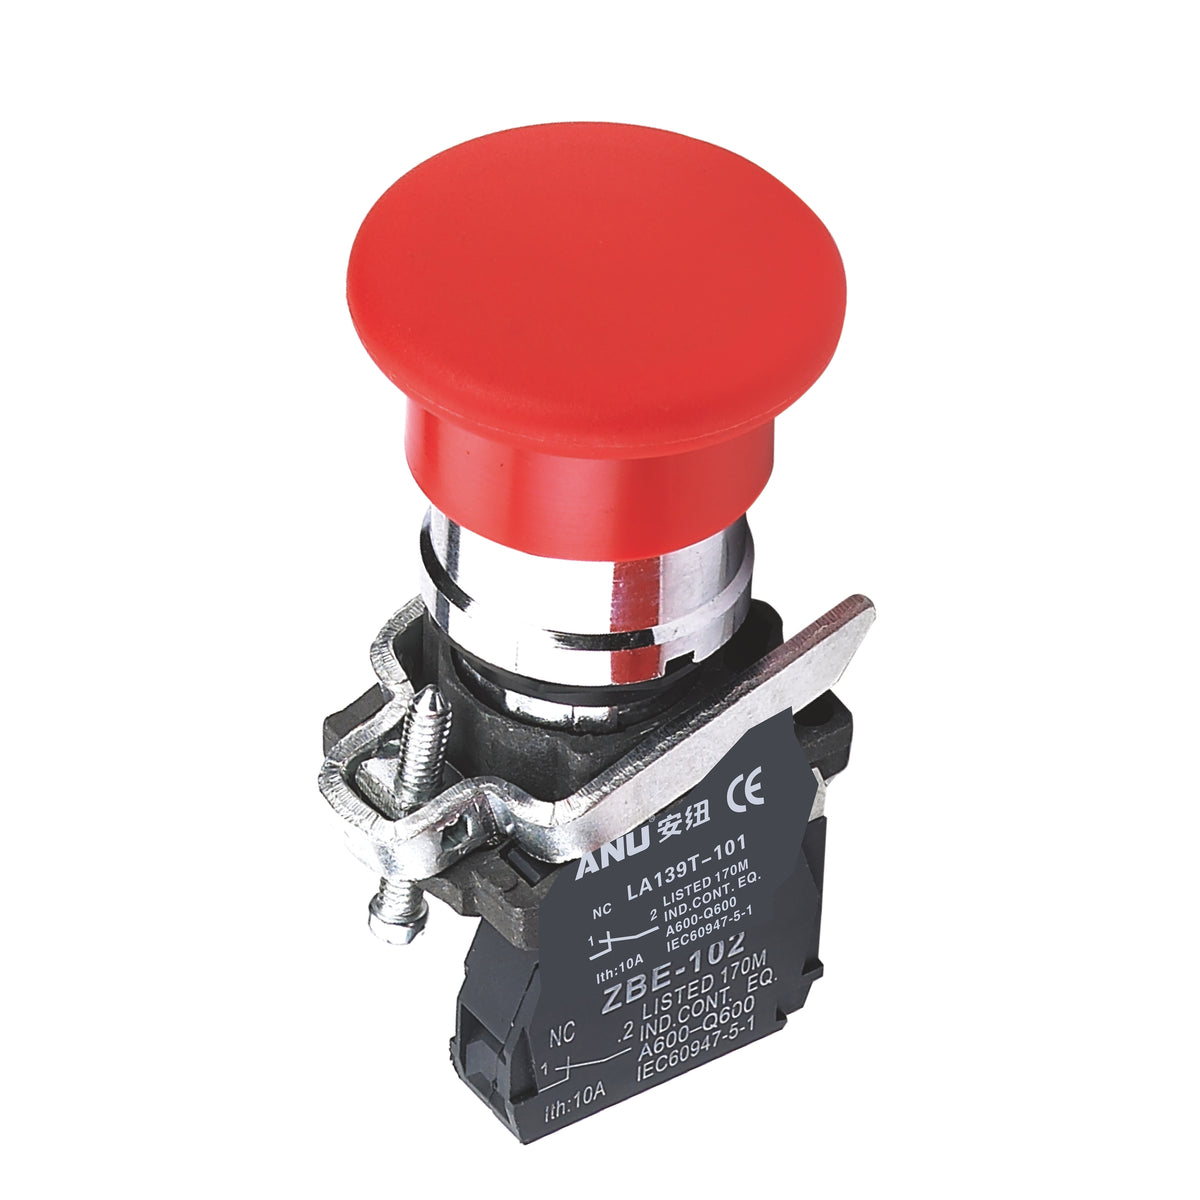 Metal Push Button Switch Mushroom Head Momentary Red 1 Normally-Closed